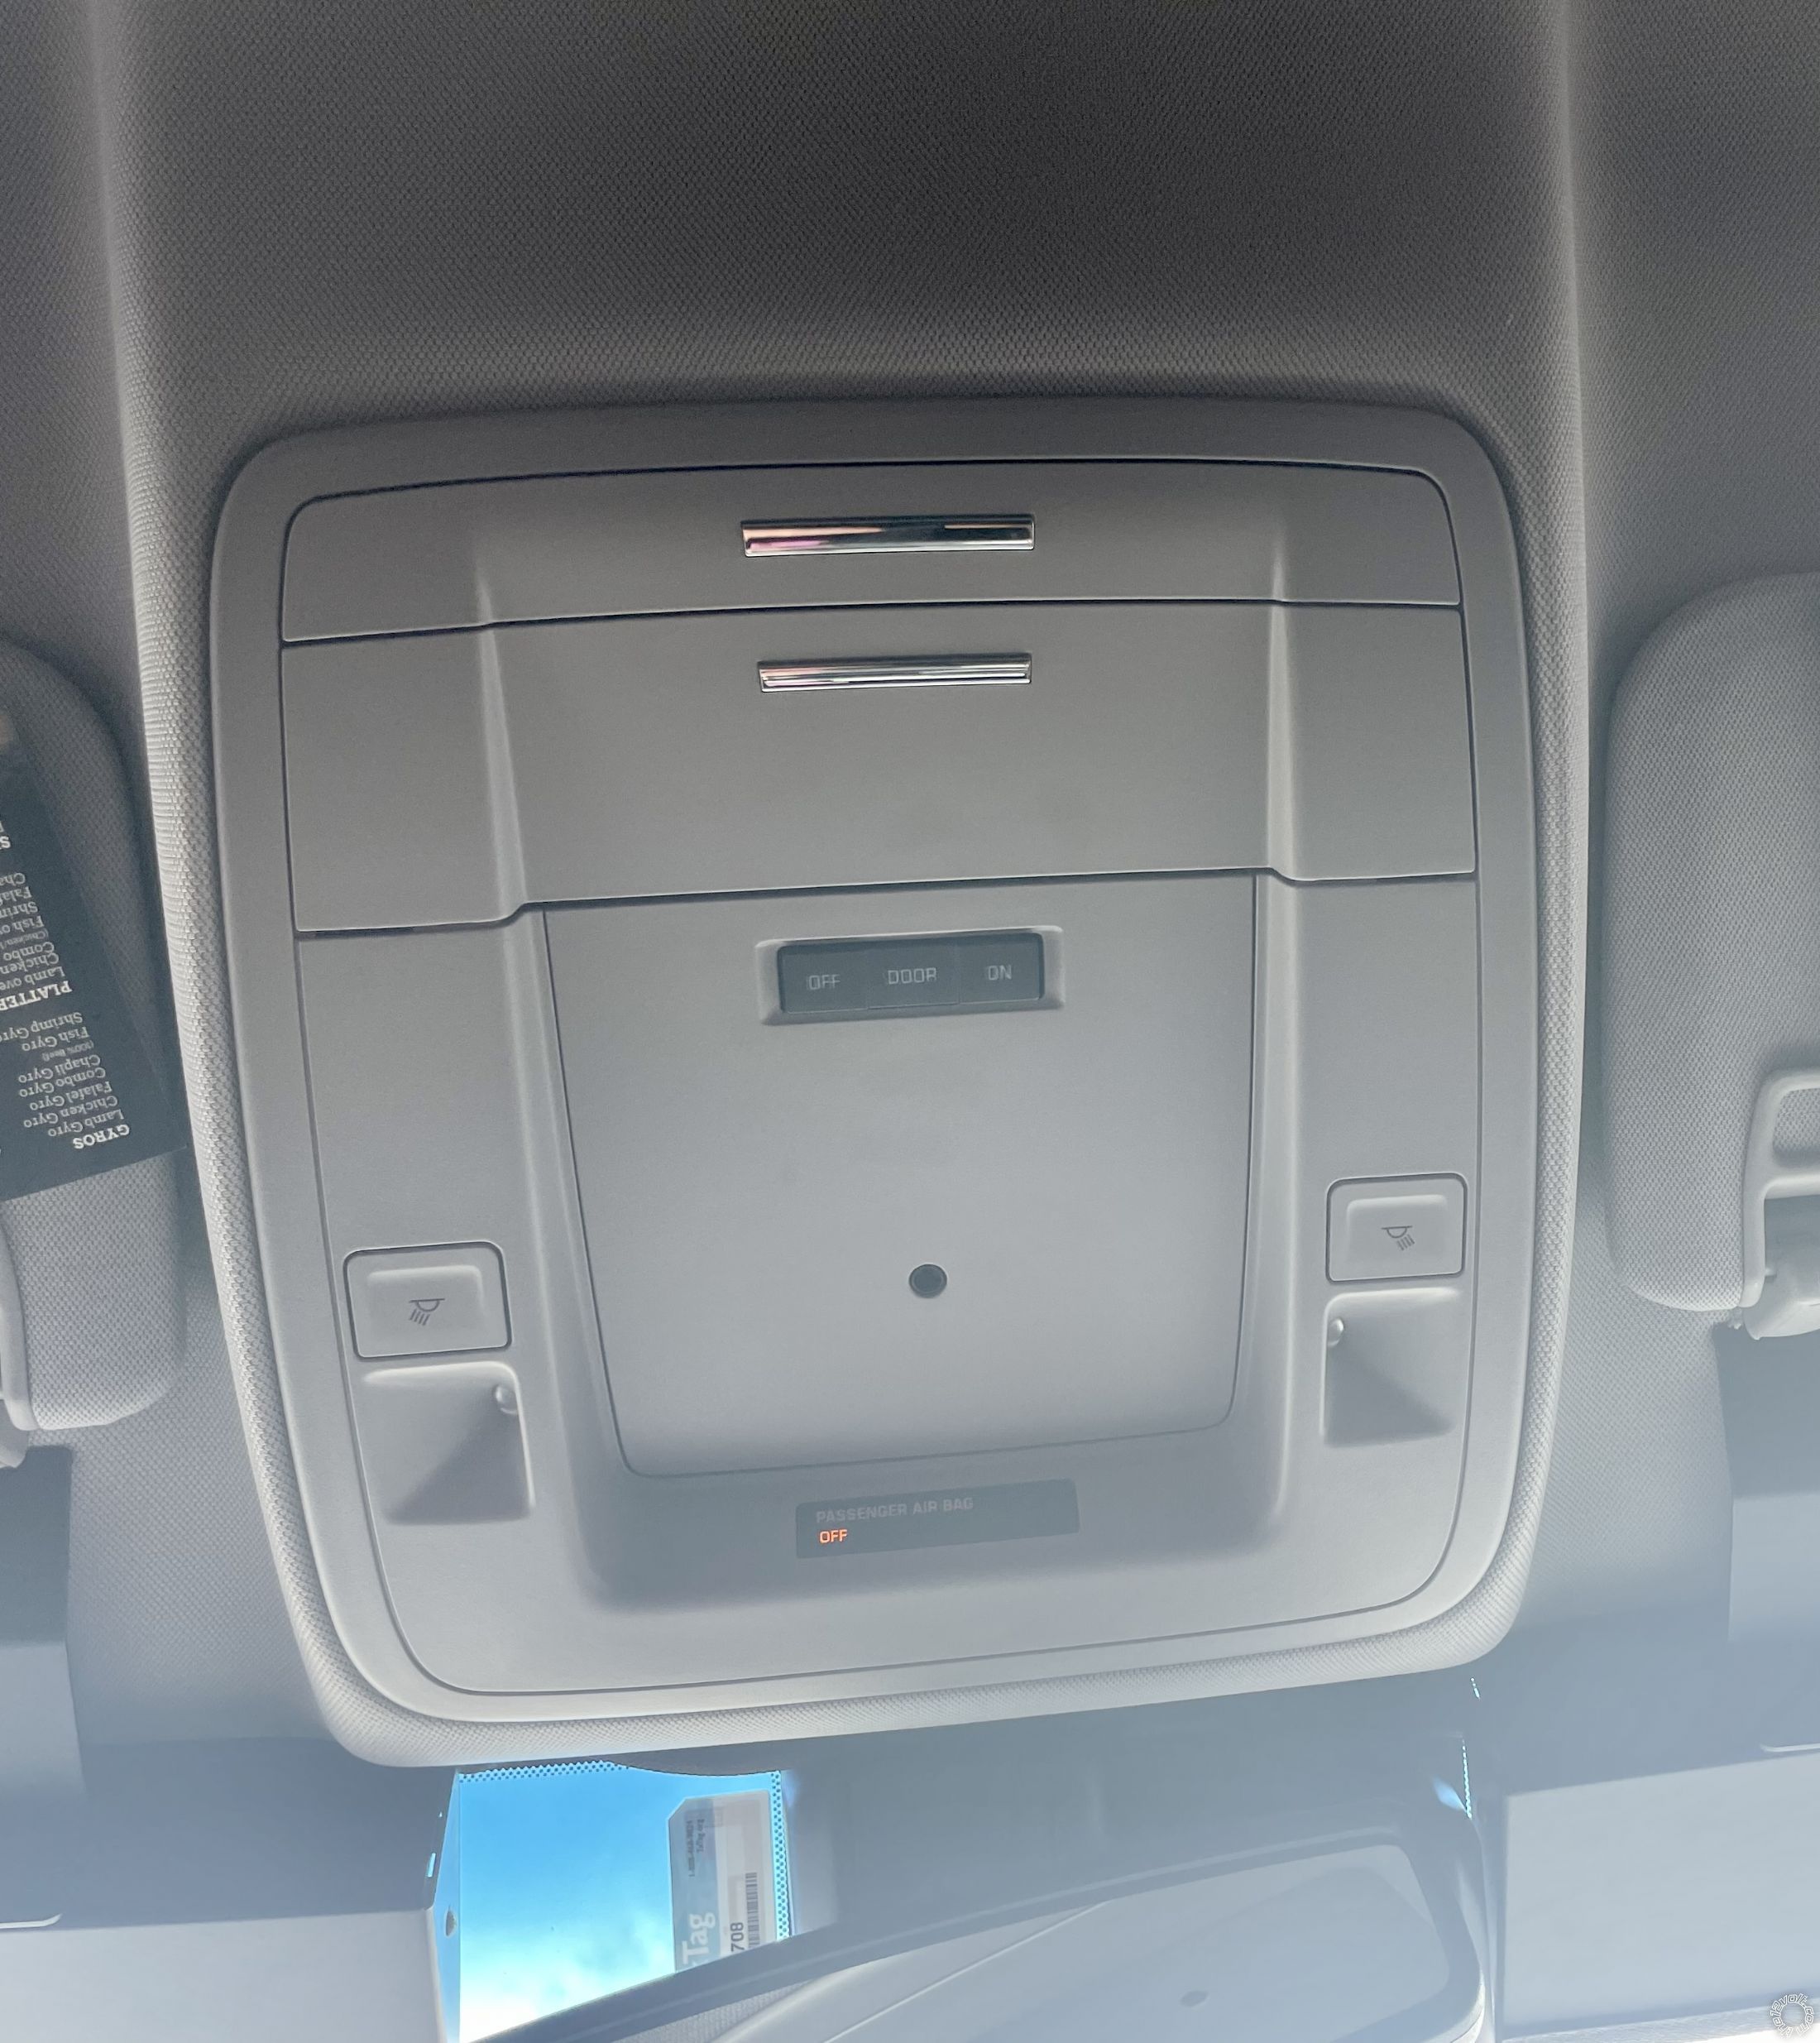 Adding A Dimming Dome Light To 2019 Chevrolet Tahoe - Last Post -- posted image.